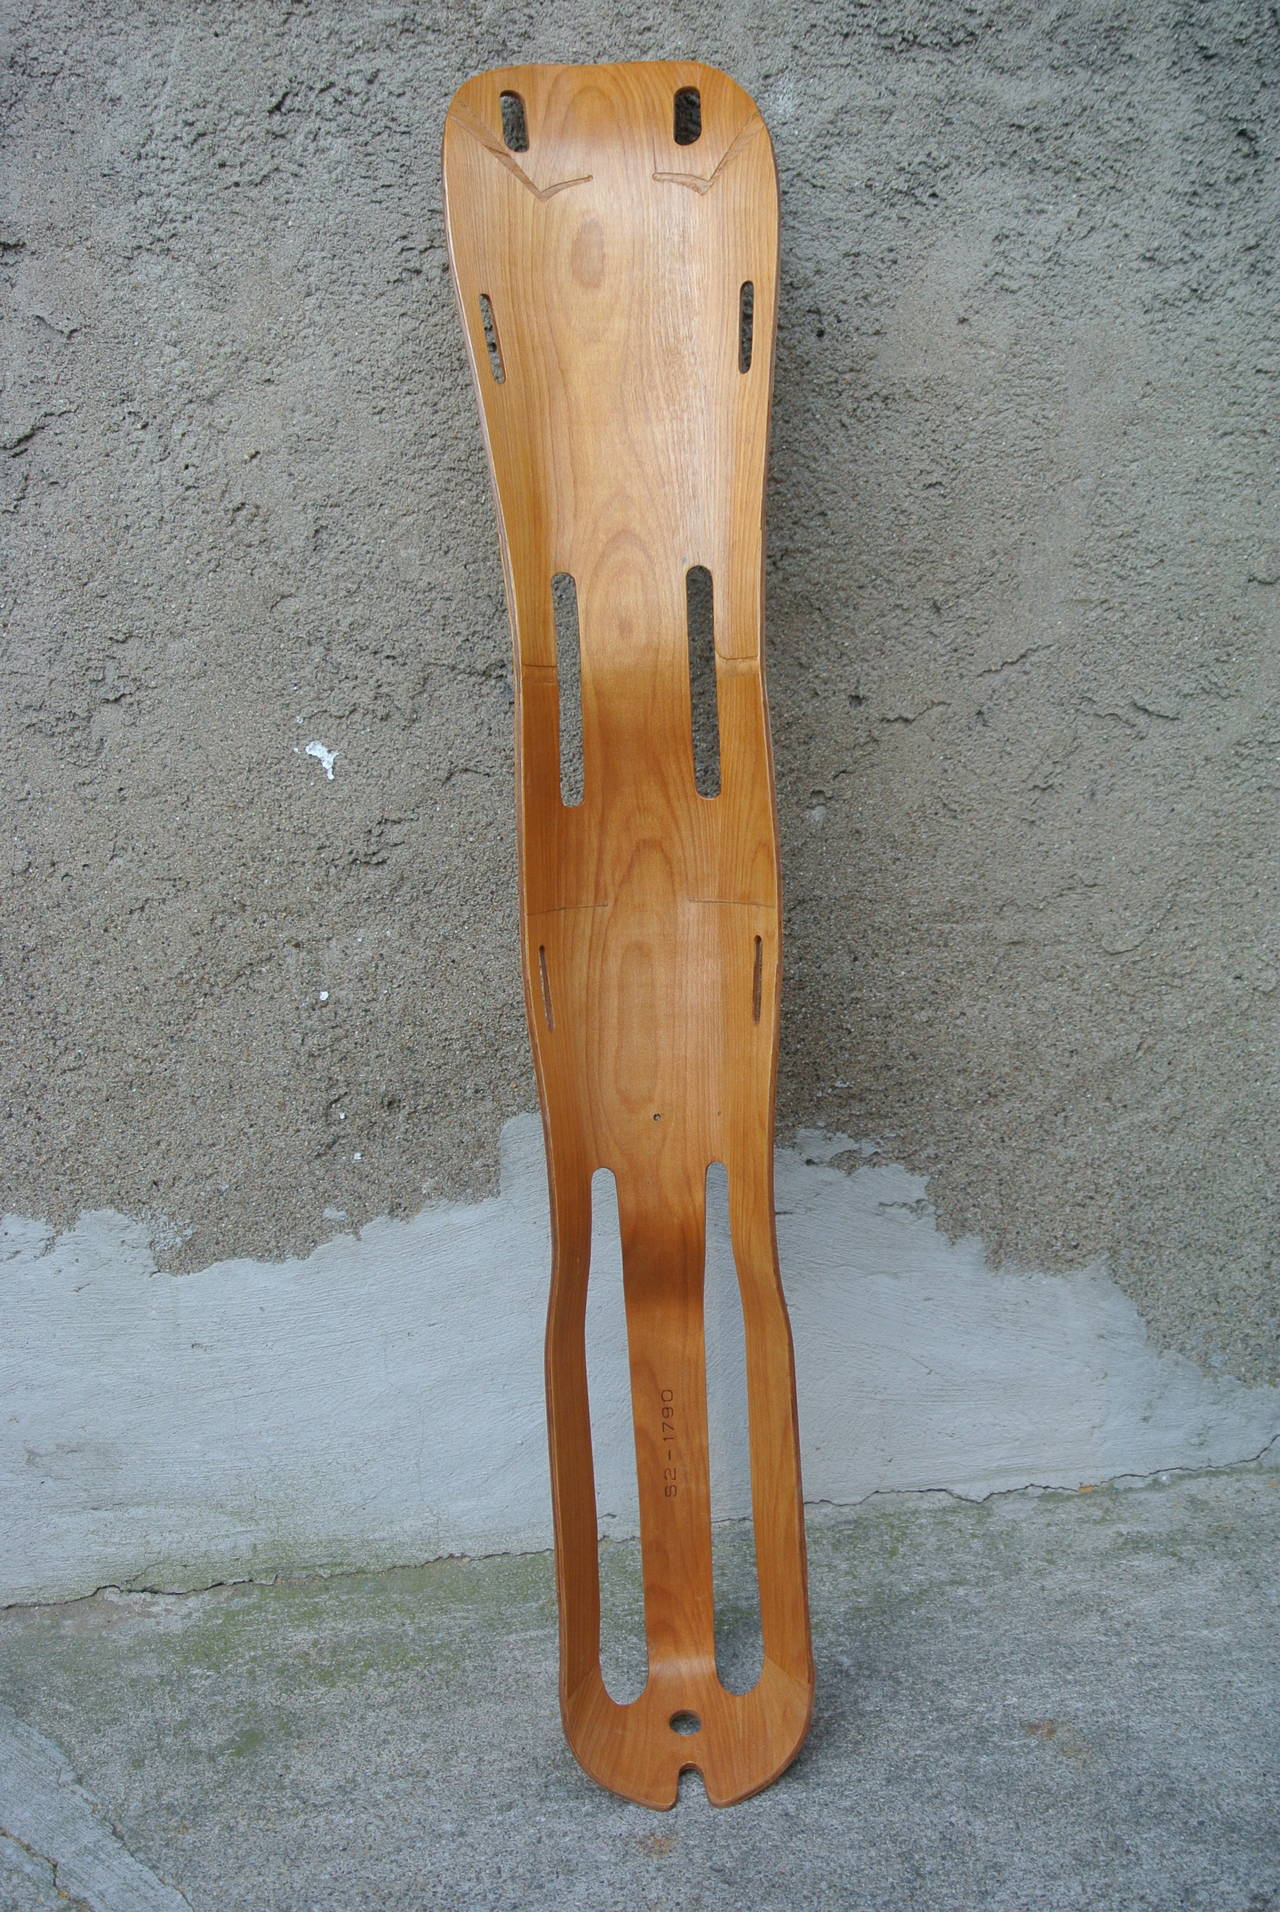 Molded Plywood World War II Leg Splints by Charles Eames for Evans In Excellent Condition For Sale In Morristown, NJ